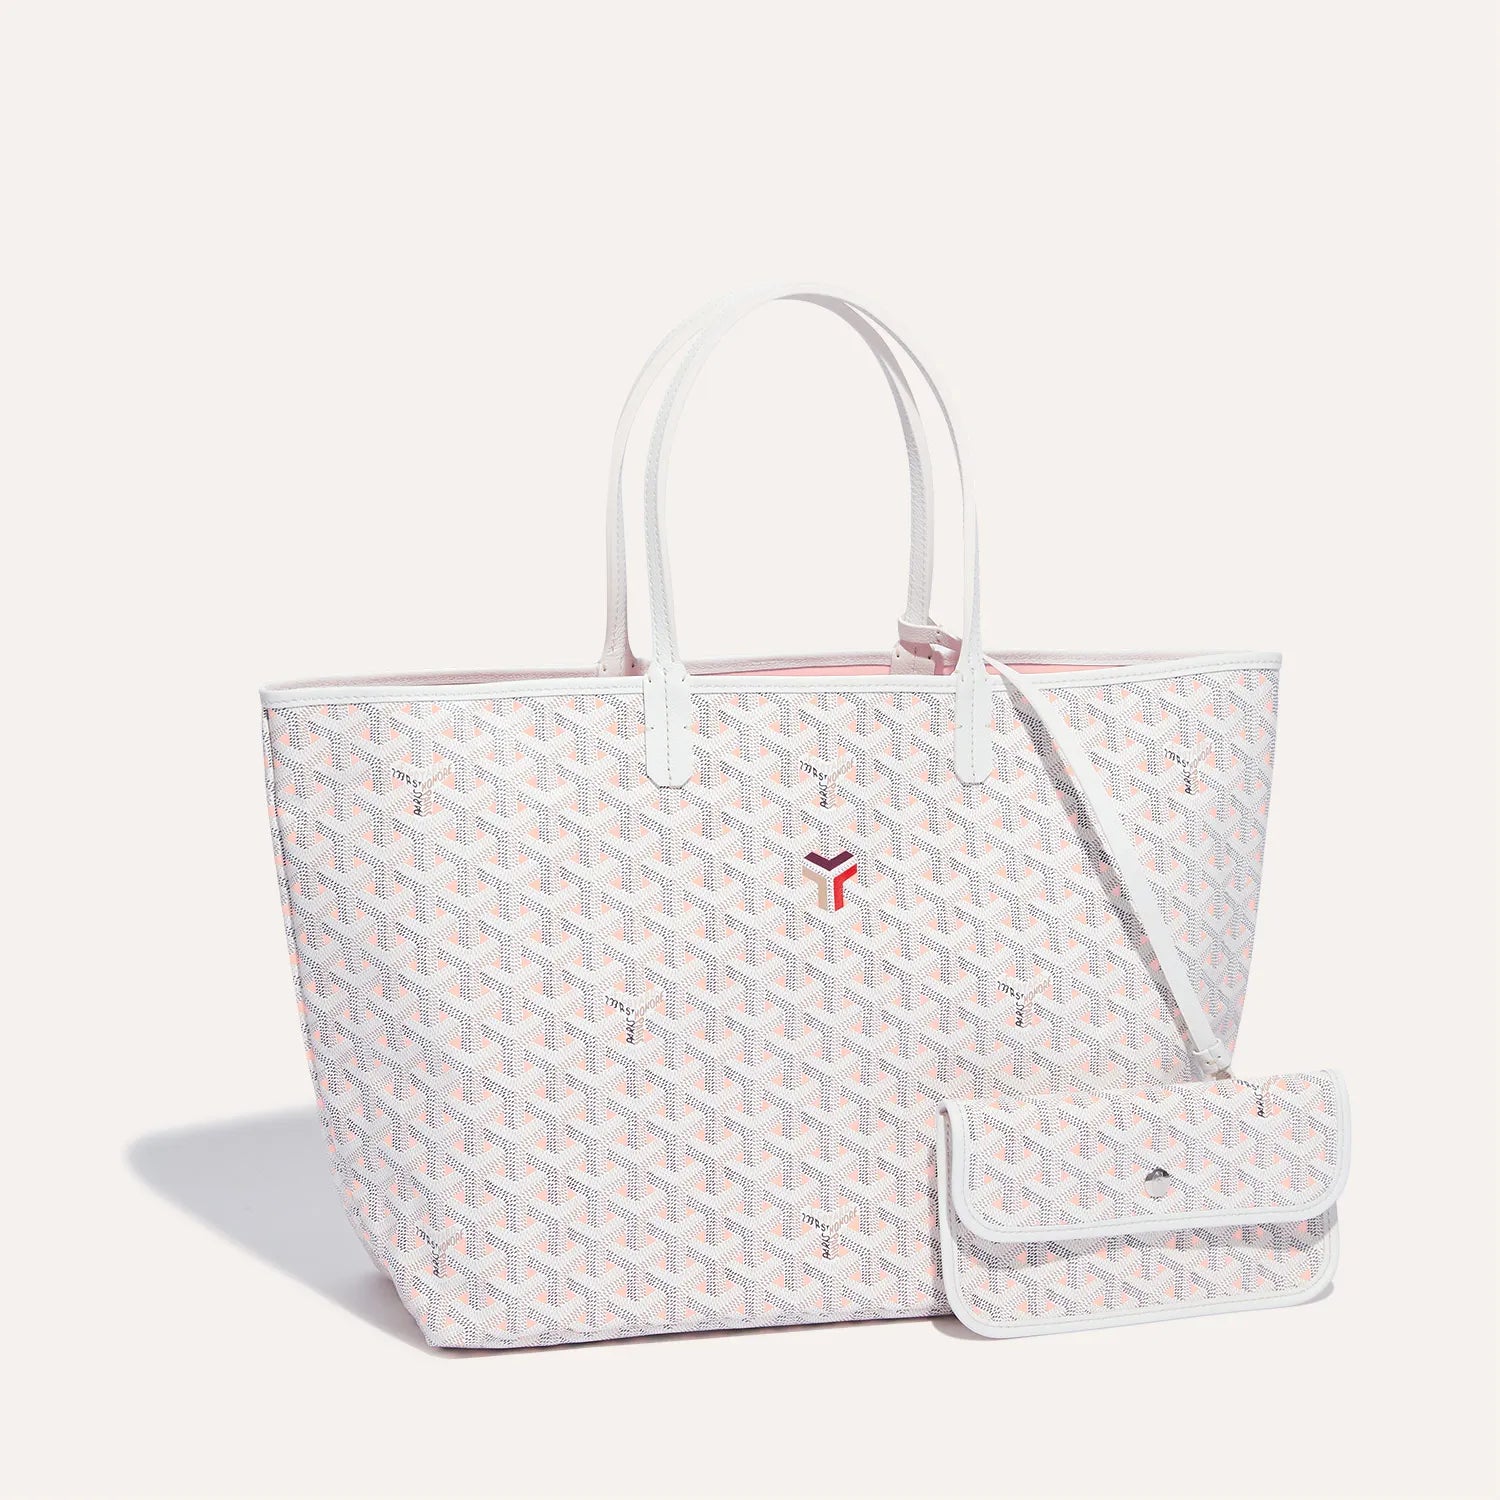 does anyone have pics of the new Goyard st louis claire tote?, Page 5